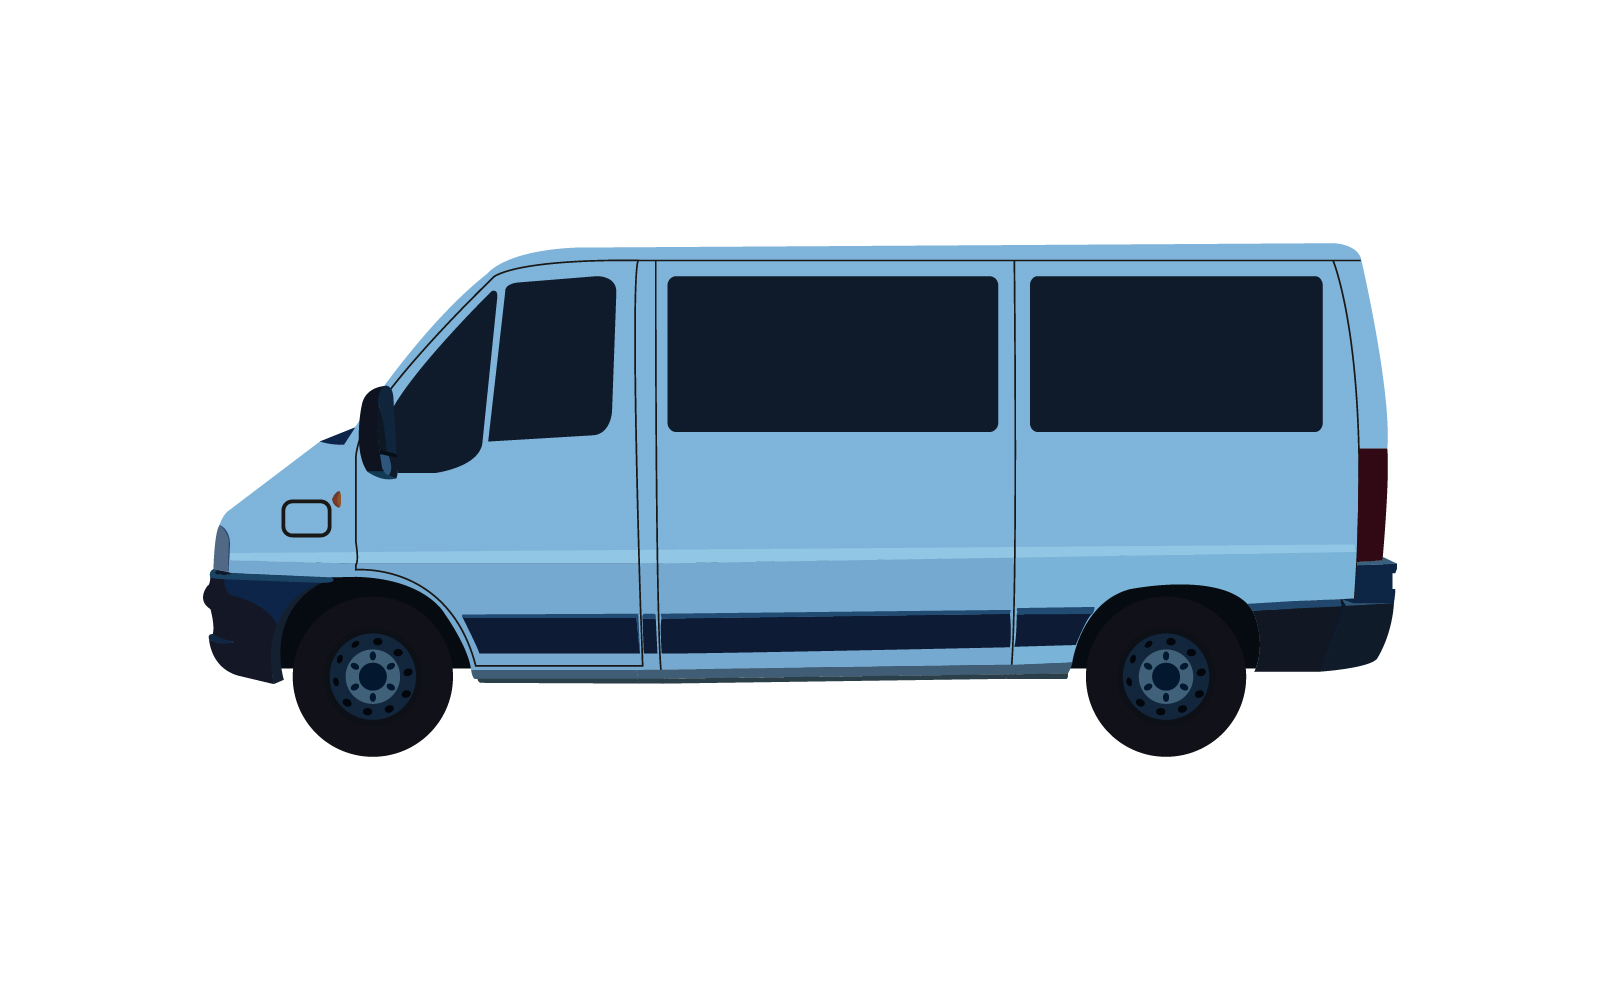 Van illustrated and colored on a white background in vector